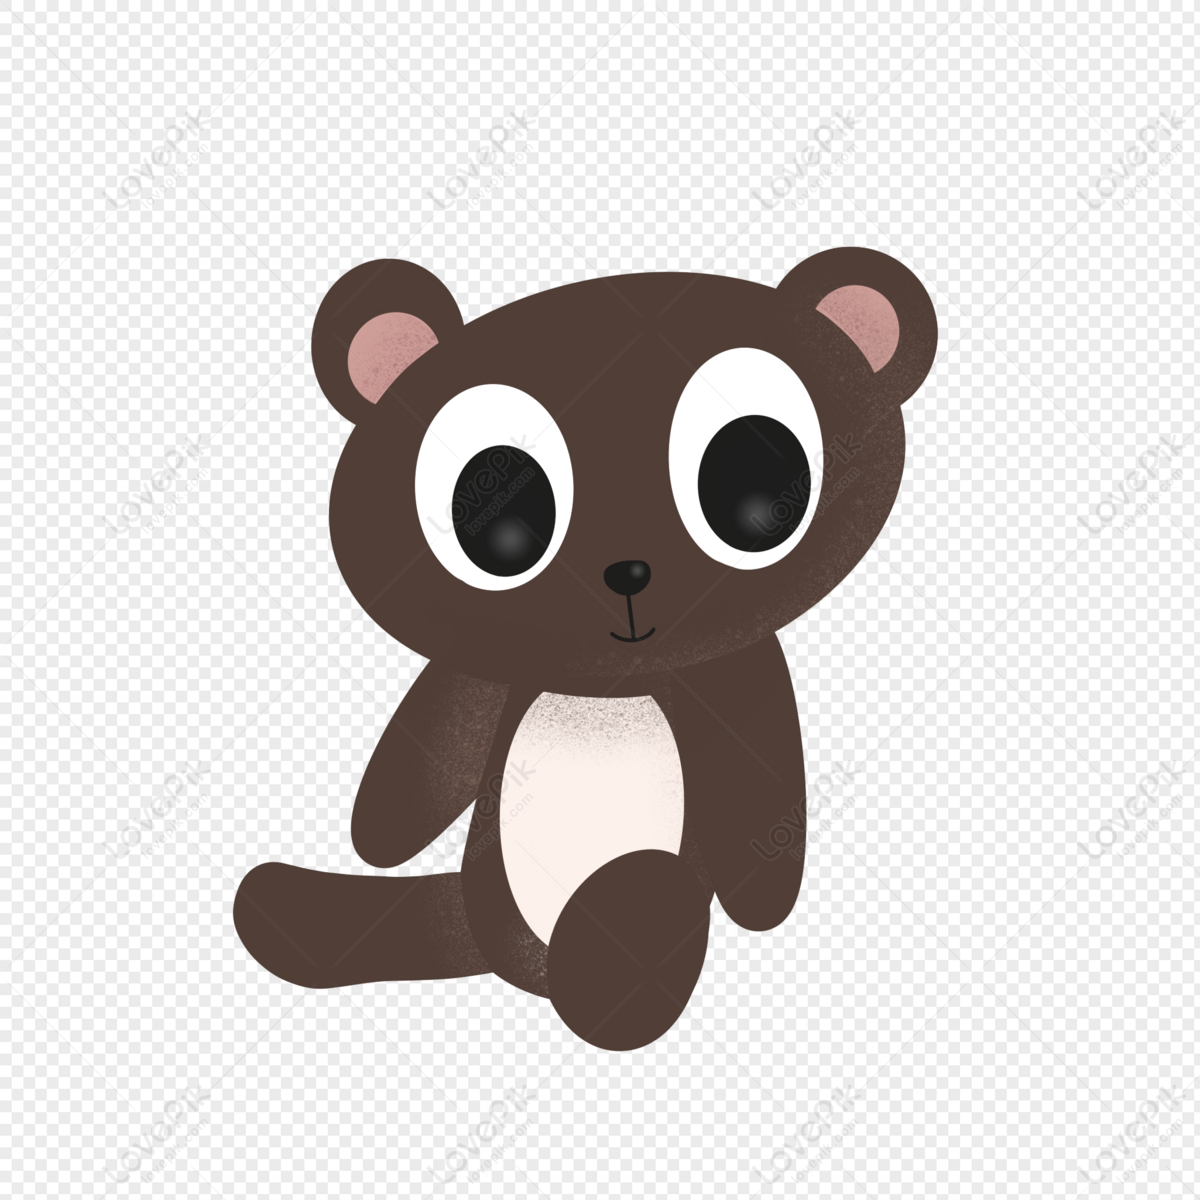 Cute Cartoon Bear Toy PNG Transparent And Clipart Image For Free Download -  Lovepik | 401256386